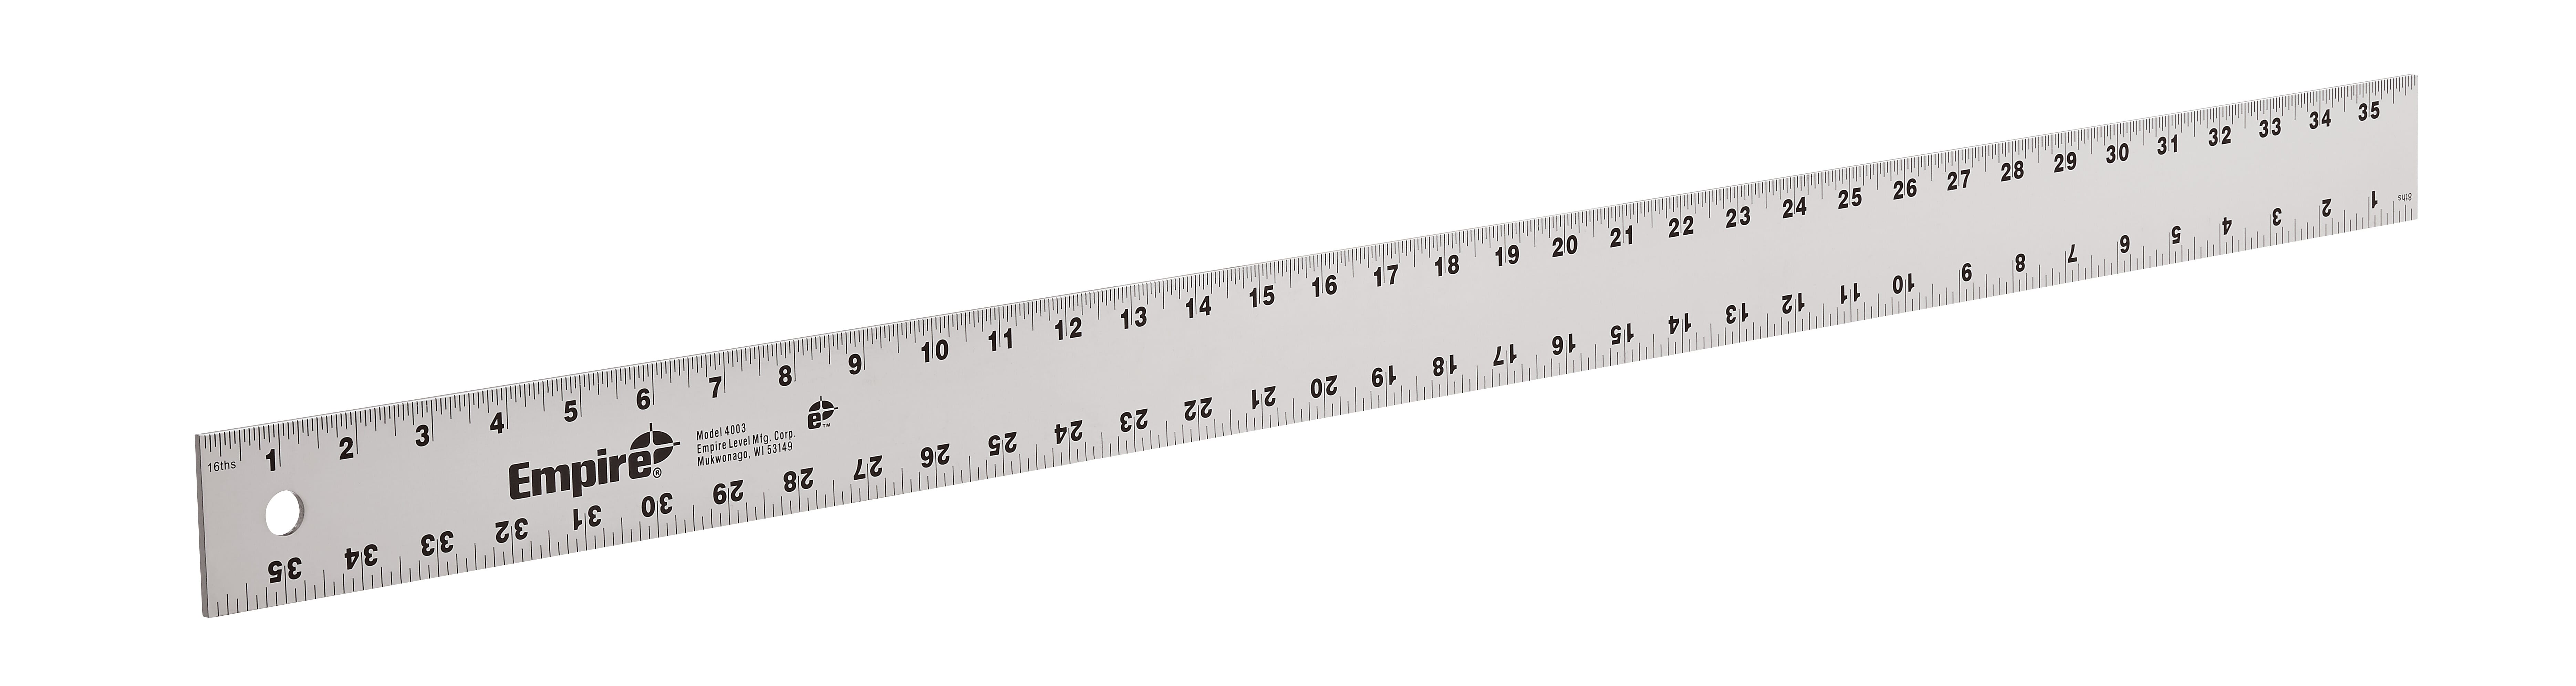 Milwaukee® Empire® 4003 Heavy Duty Straight Edge Ruler, Imperial Measuring System, Graduations 1/16 in, Aluminum